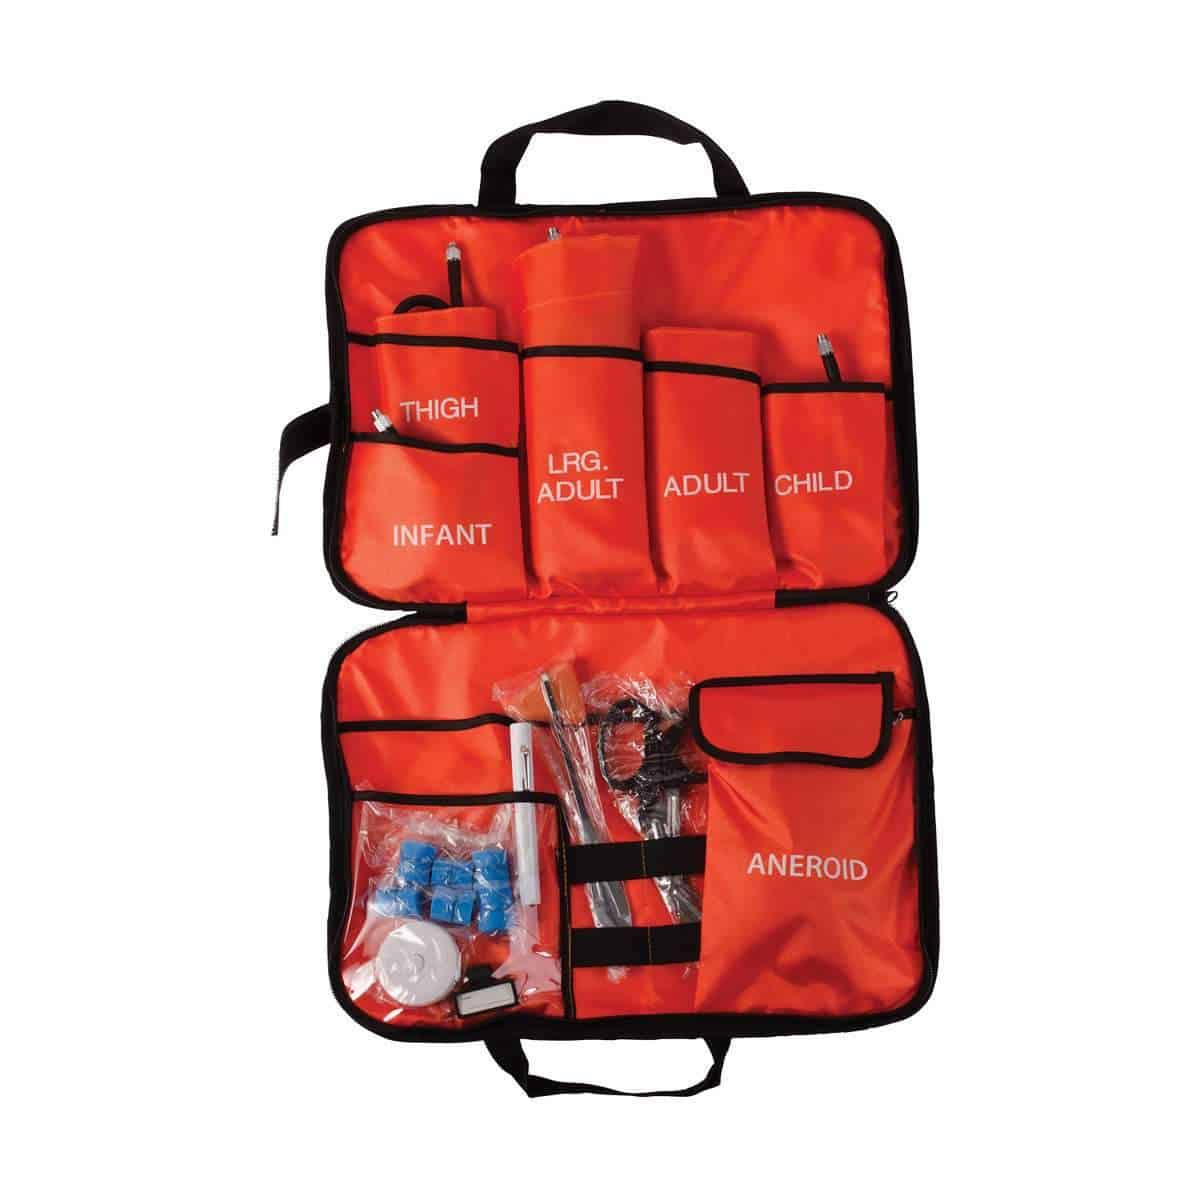 MABIS All-in-One EMT and Paramedic First Aid Kit w/5 Cuffs - Senior.com EMT Kits